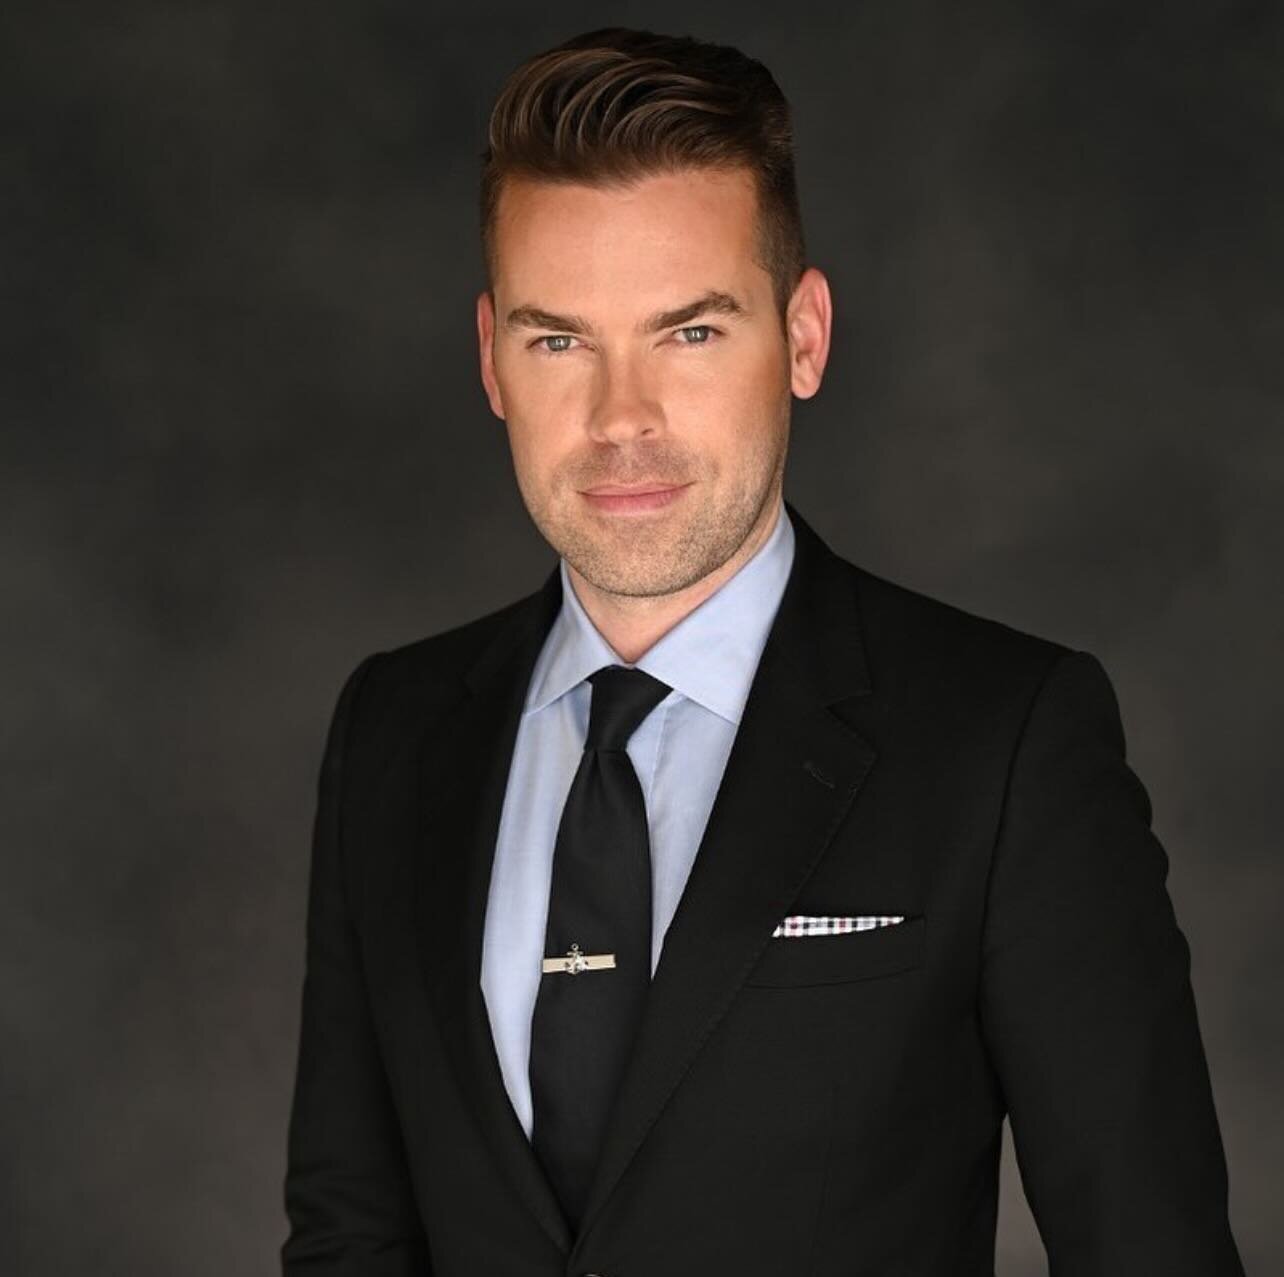 @derrickshore returns as master of ceremony for All In for Team Catapult, our annual fundraising gala!
⠀⠀⠀⠀⠀⠀⠀⠀⠀
Derrick is a three-time Emmy winning reporter and producer, and co-host of @houstonlifetv on @krpc2. He was the first TV journalist to tr